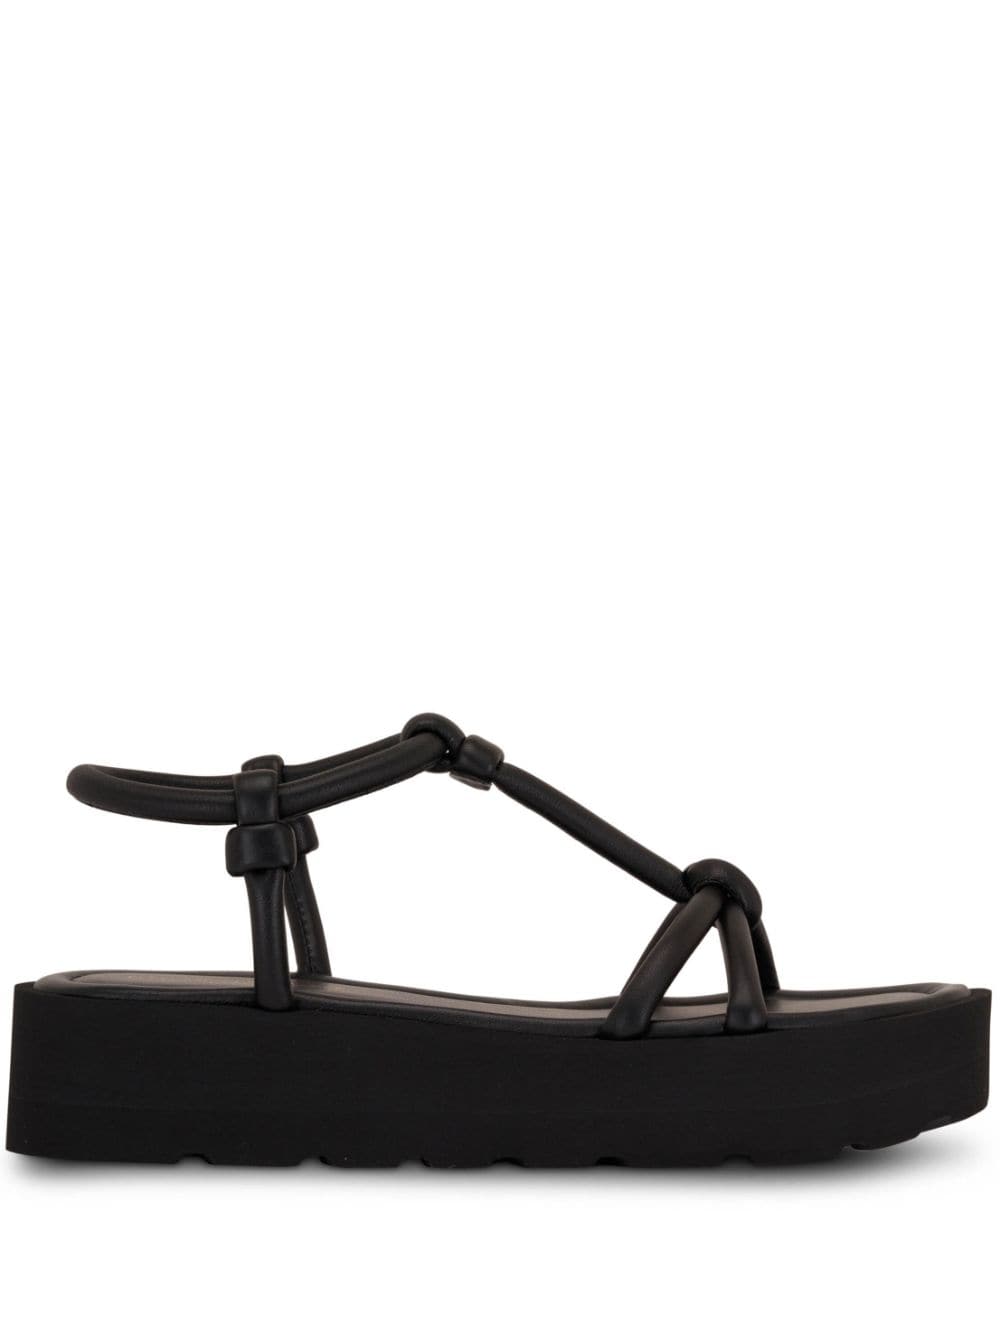 GIANVITO ROSSI Open Toe Flatform Leather Sandals for Women in Black